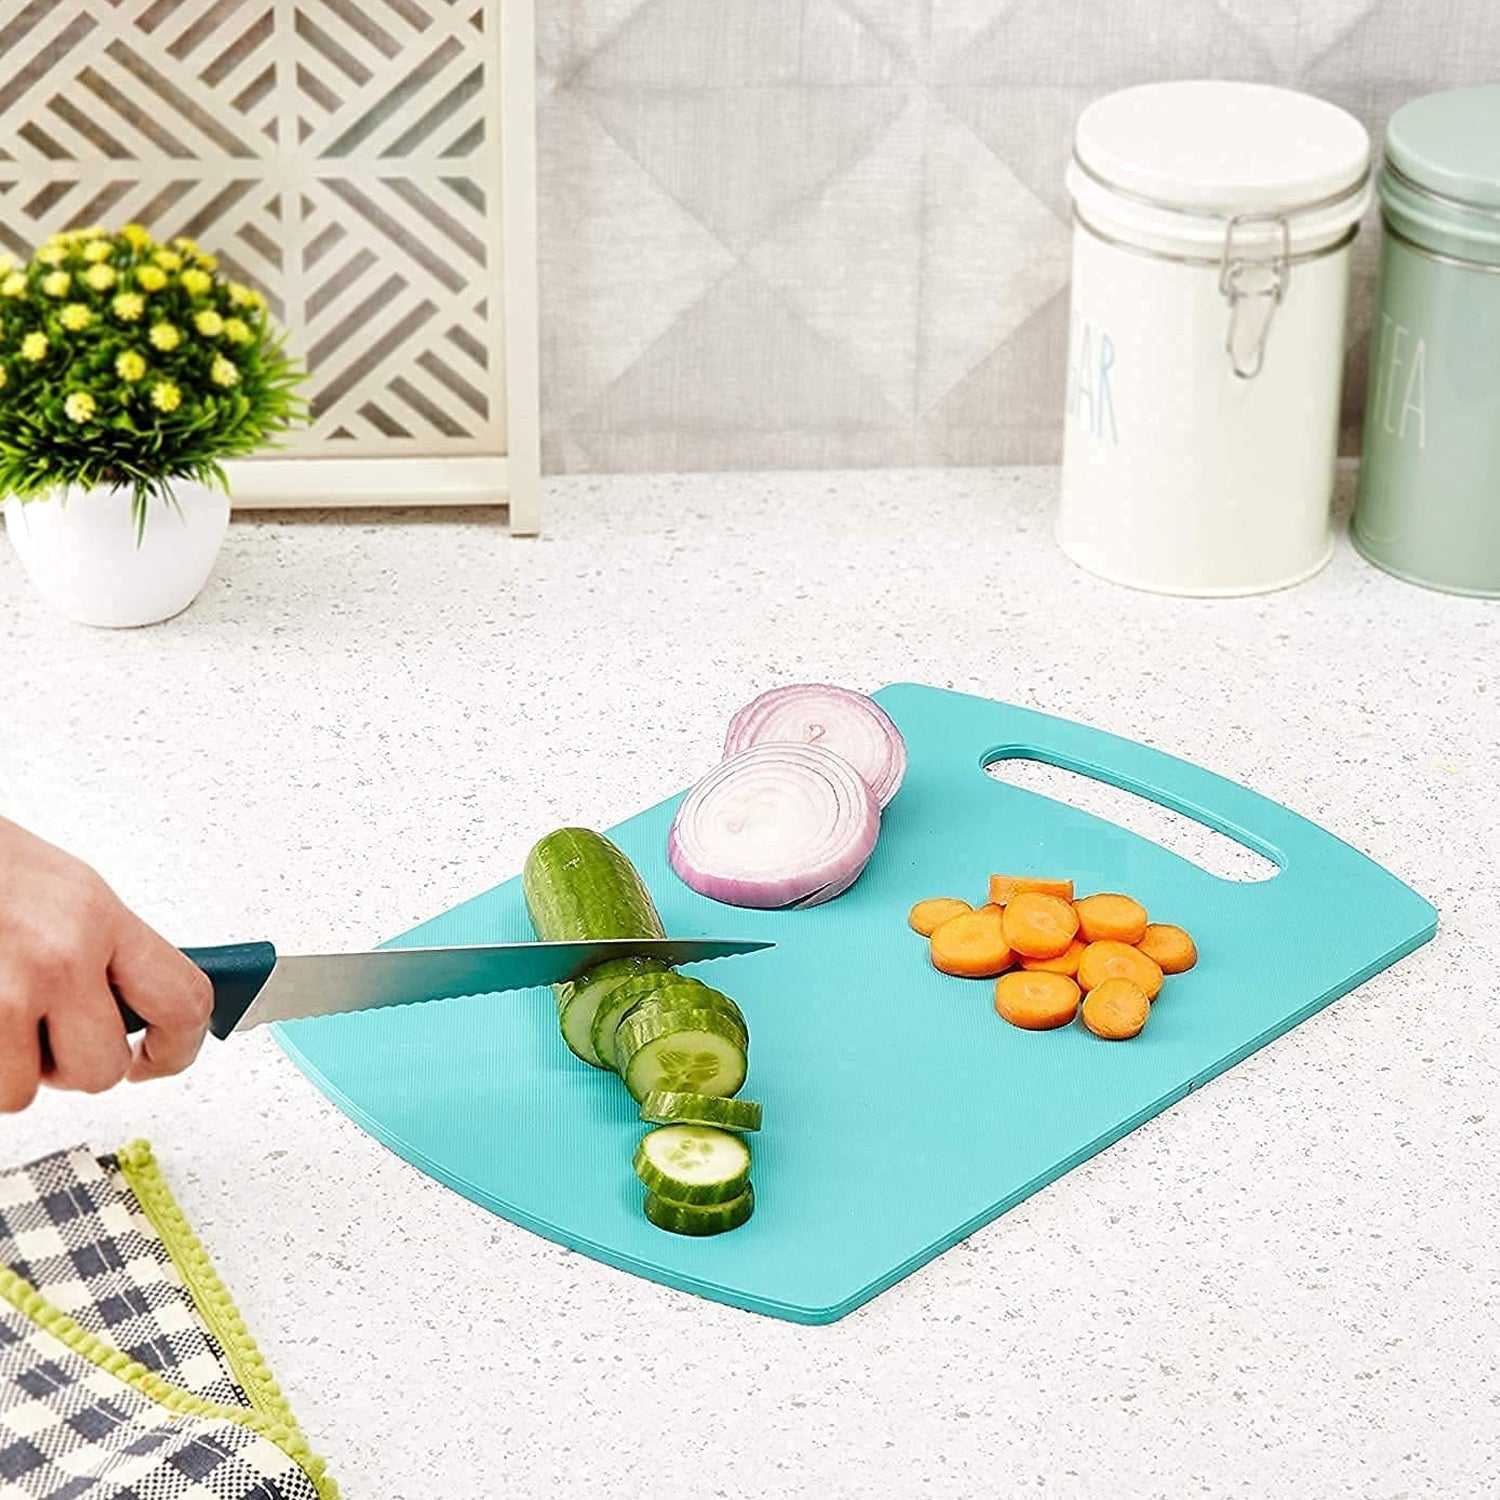 0086A Chopping Board Cutting Pad Plastic for Home and Kitchen Accessories Items Tools Gadgets for Cutting Vegetables Non Sleep Anti Skid dd